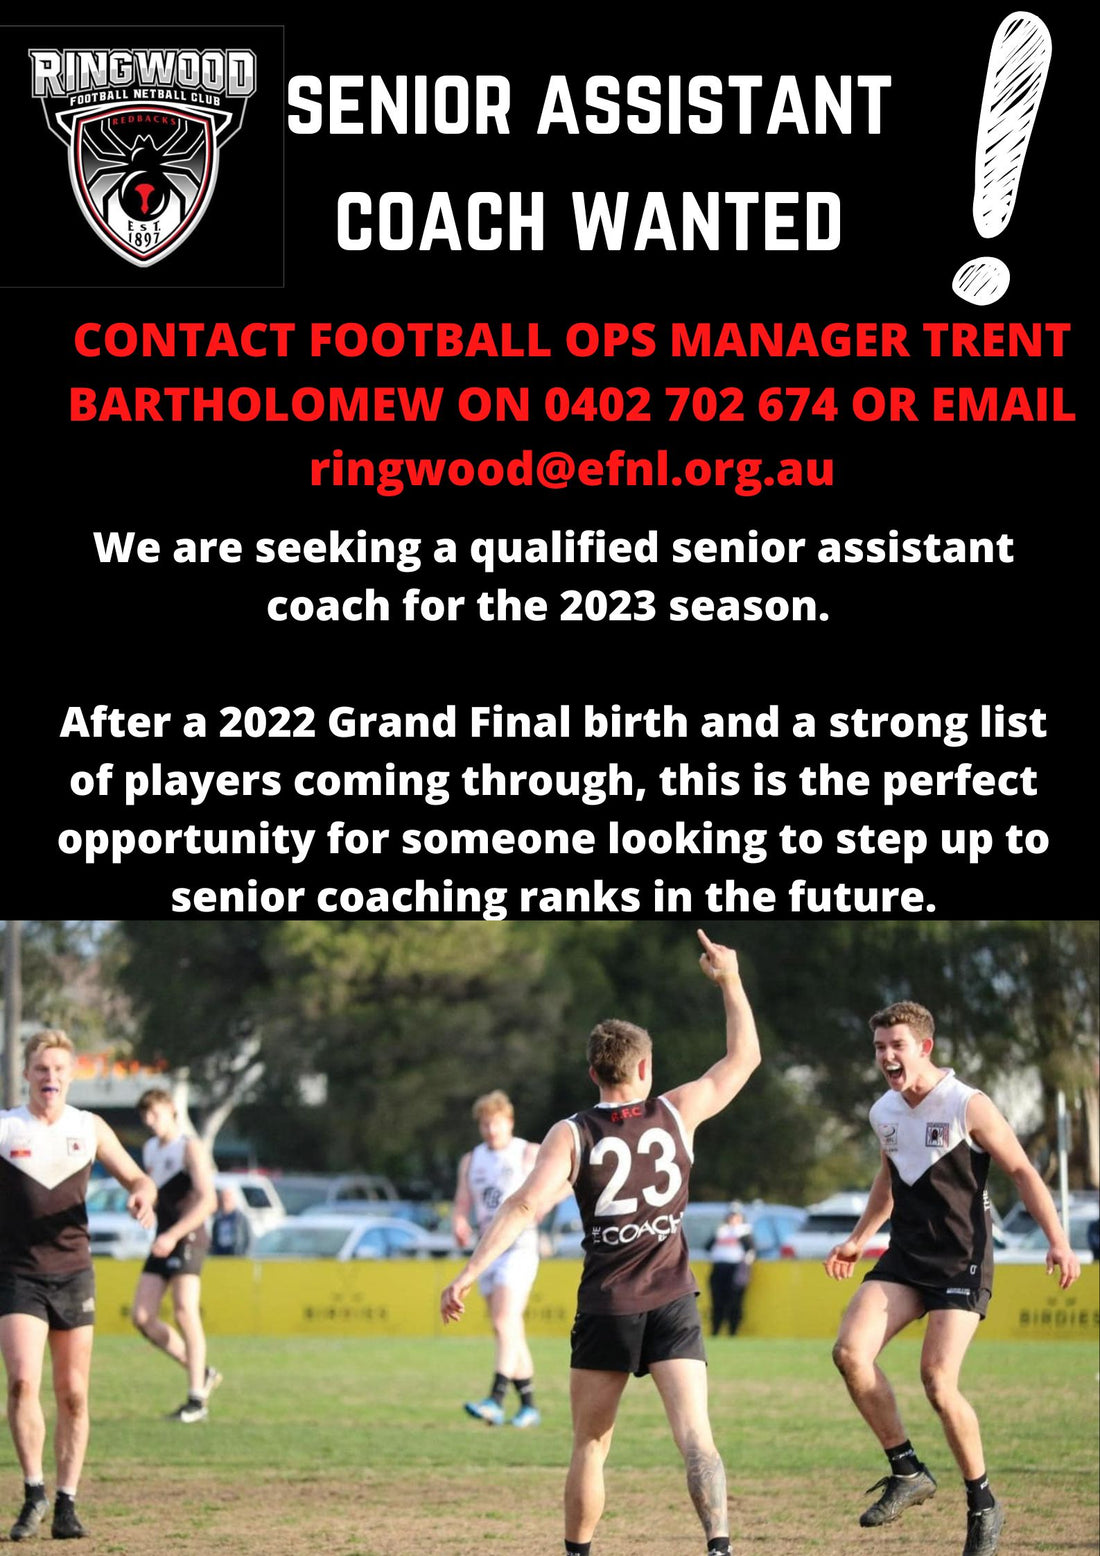 Senior Assistant Coach Wanted